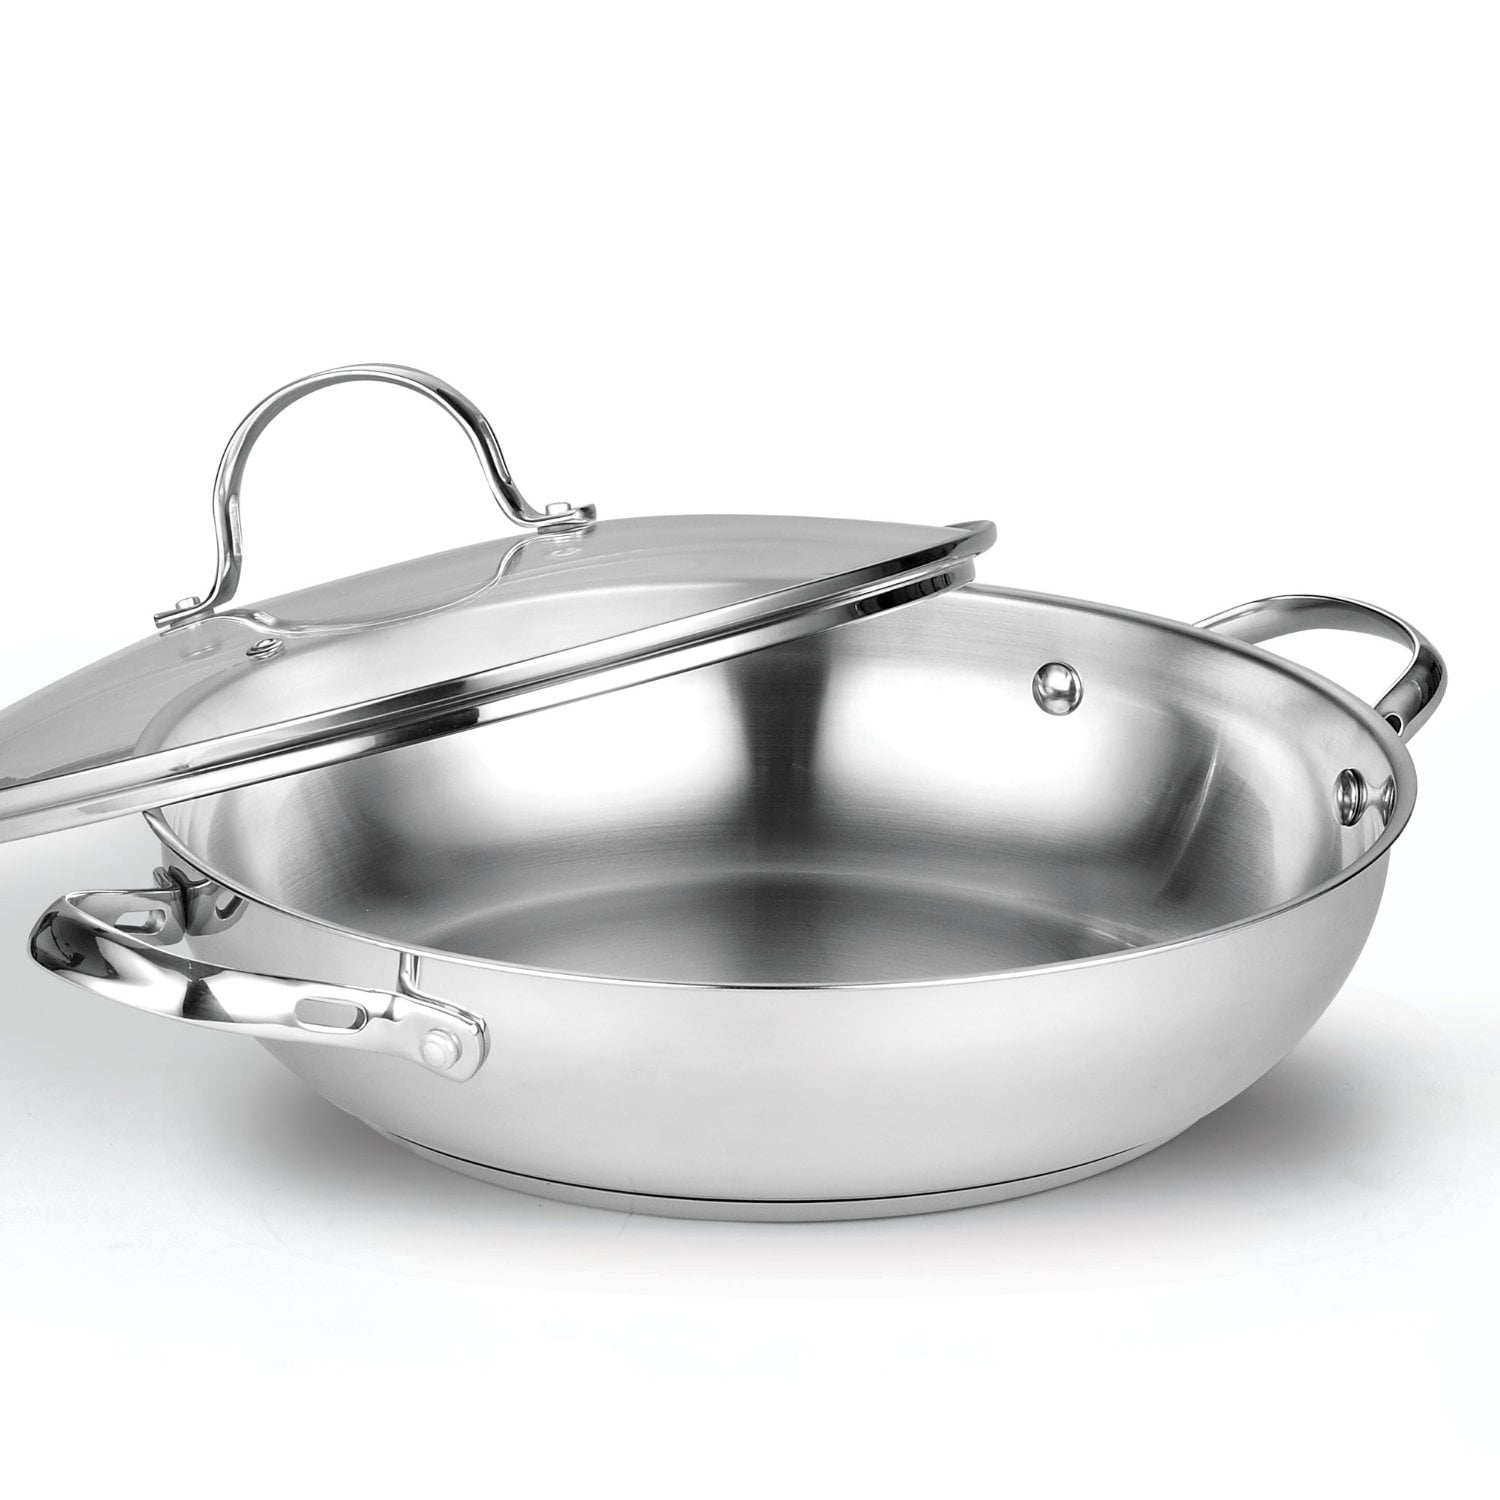  Vinchef Stainless Steel Wok Pan with Glass Lid 12 Inch